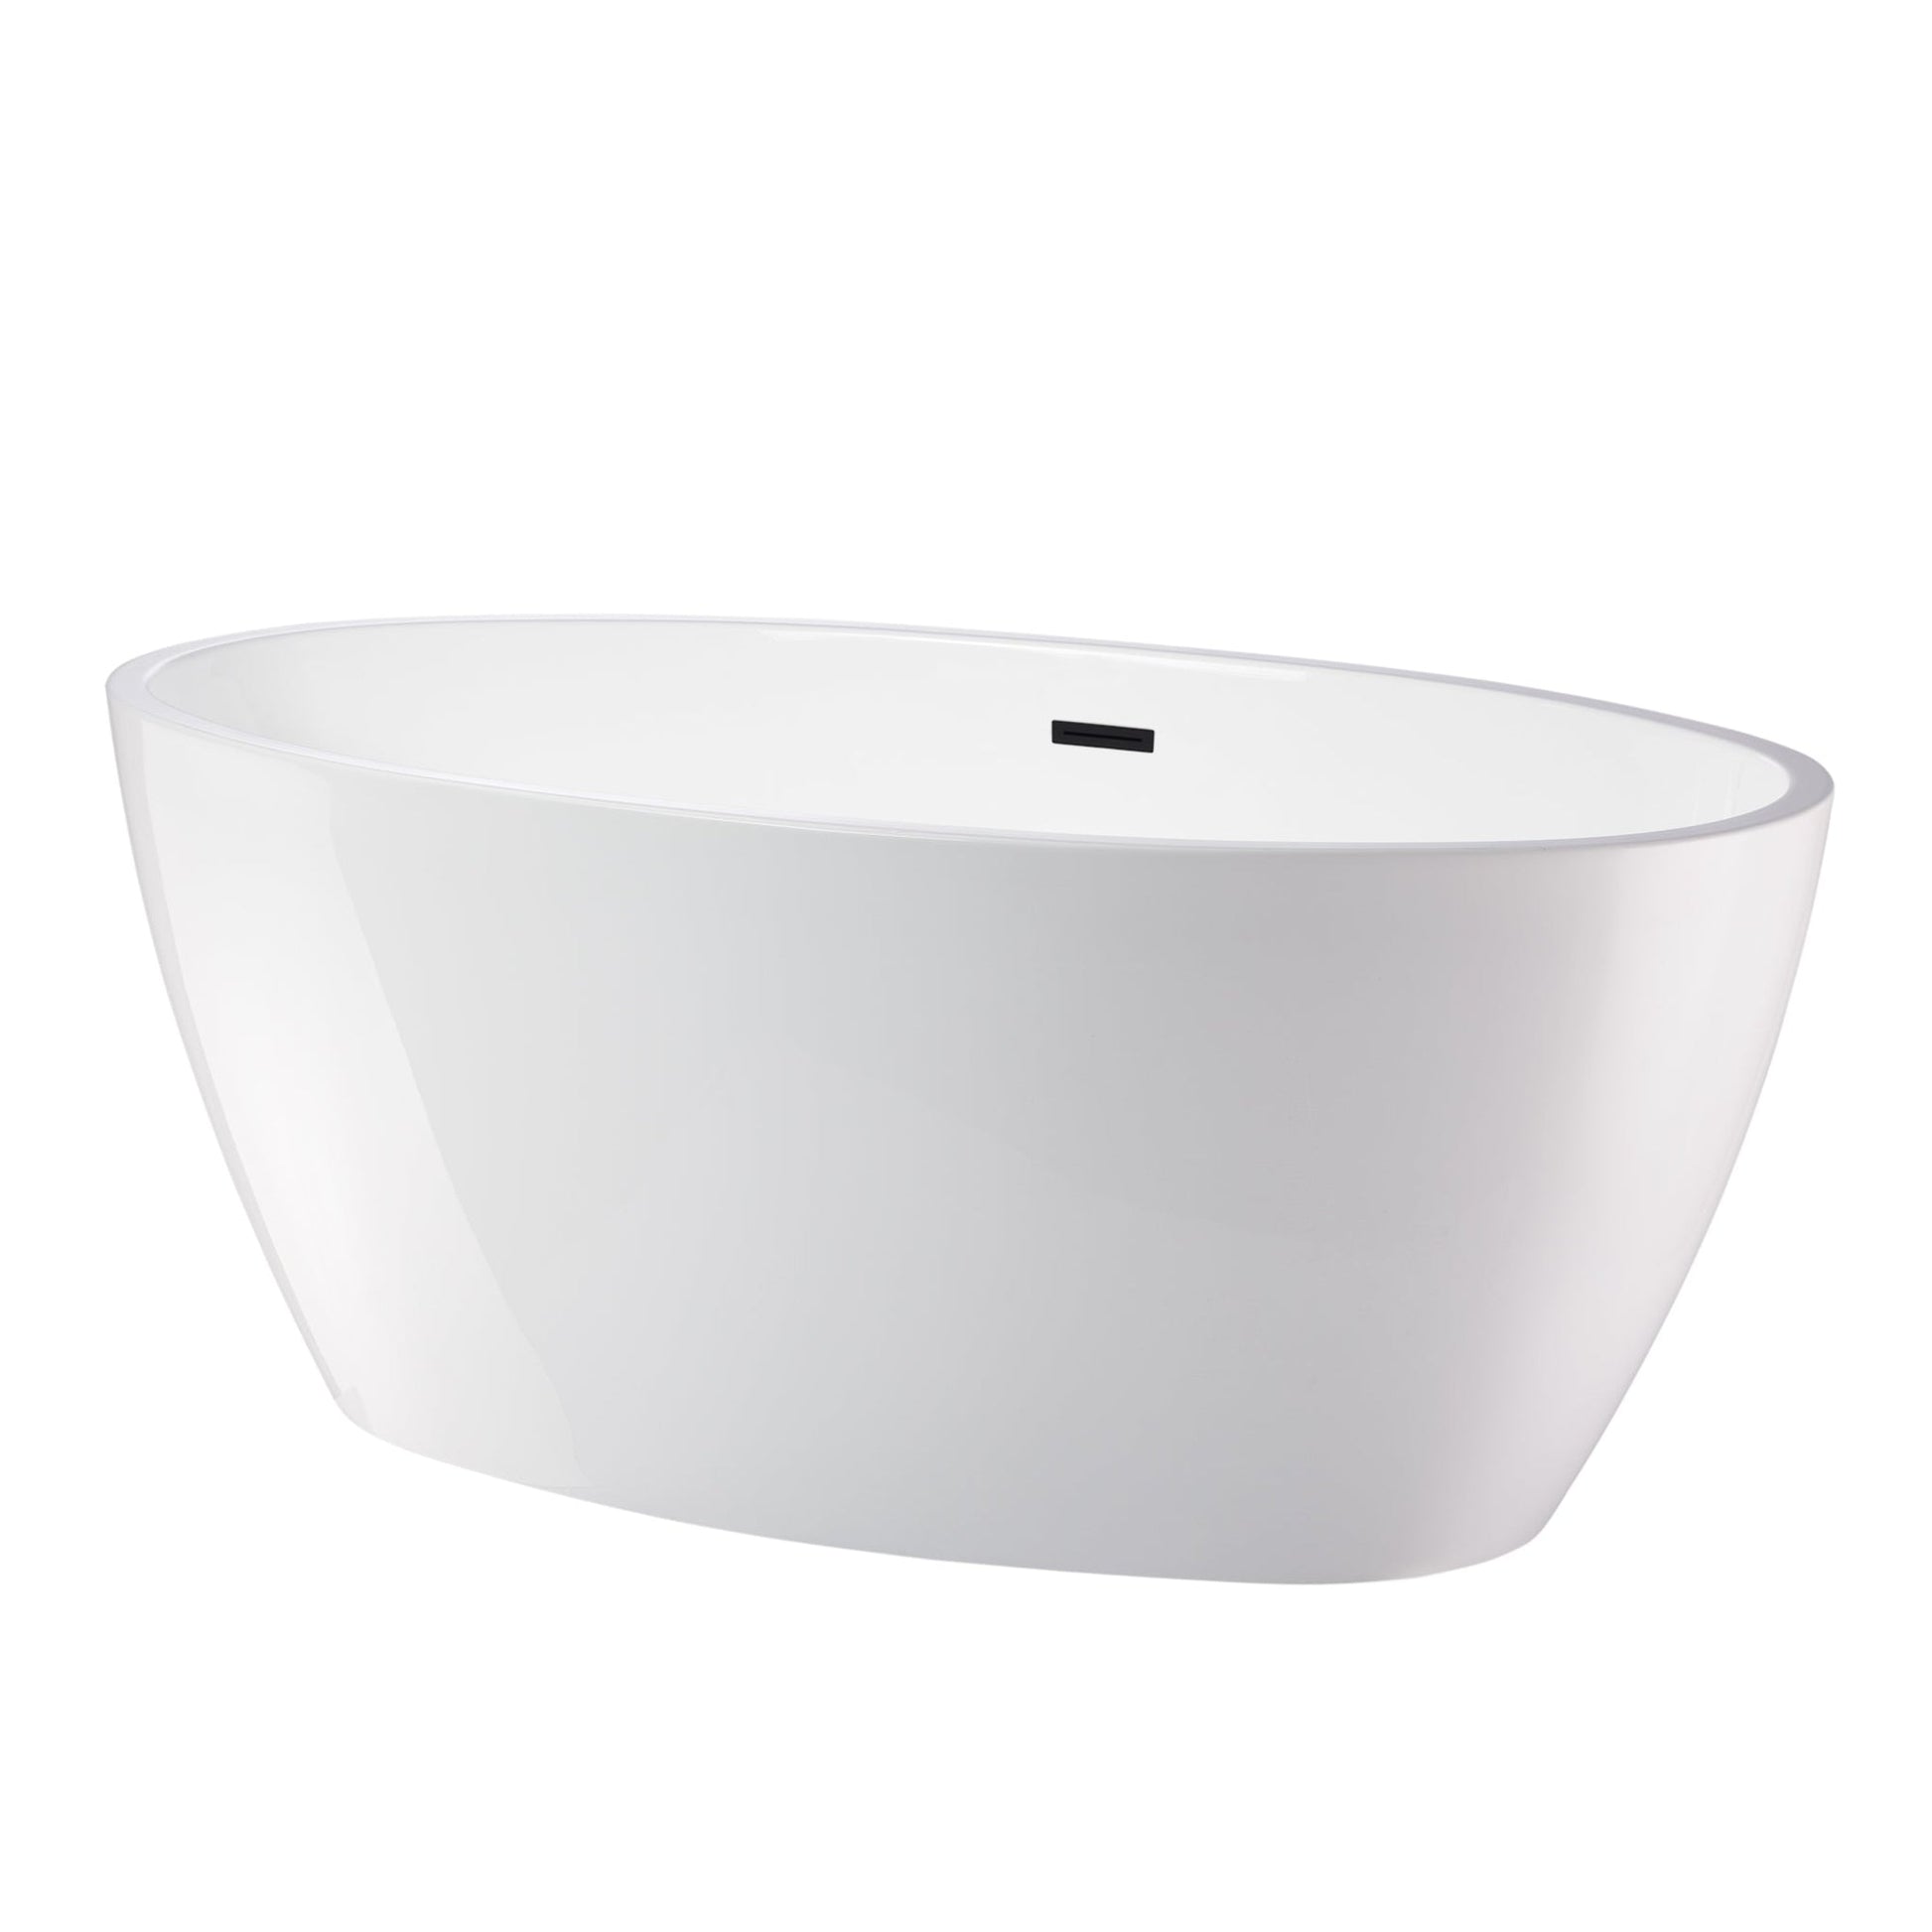 Vanity Art 59" x 22" White Acrylic Freestanding Contemporary Design Soaking Bathtub With Matte Black Slotted Overflow & Pop-up Drain